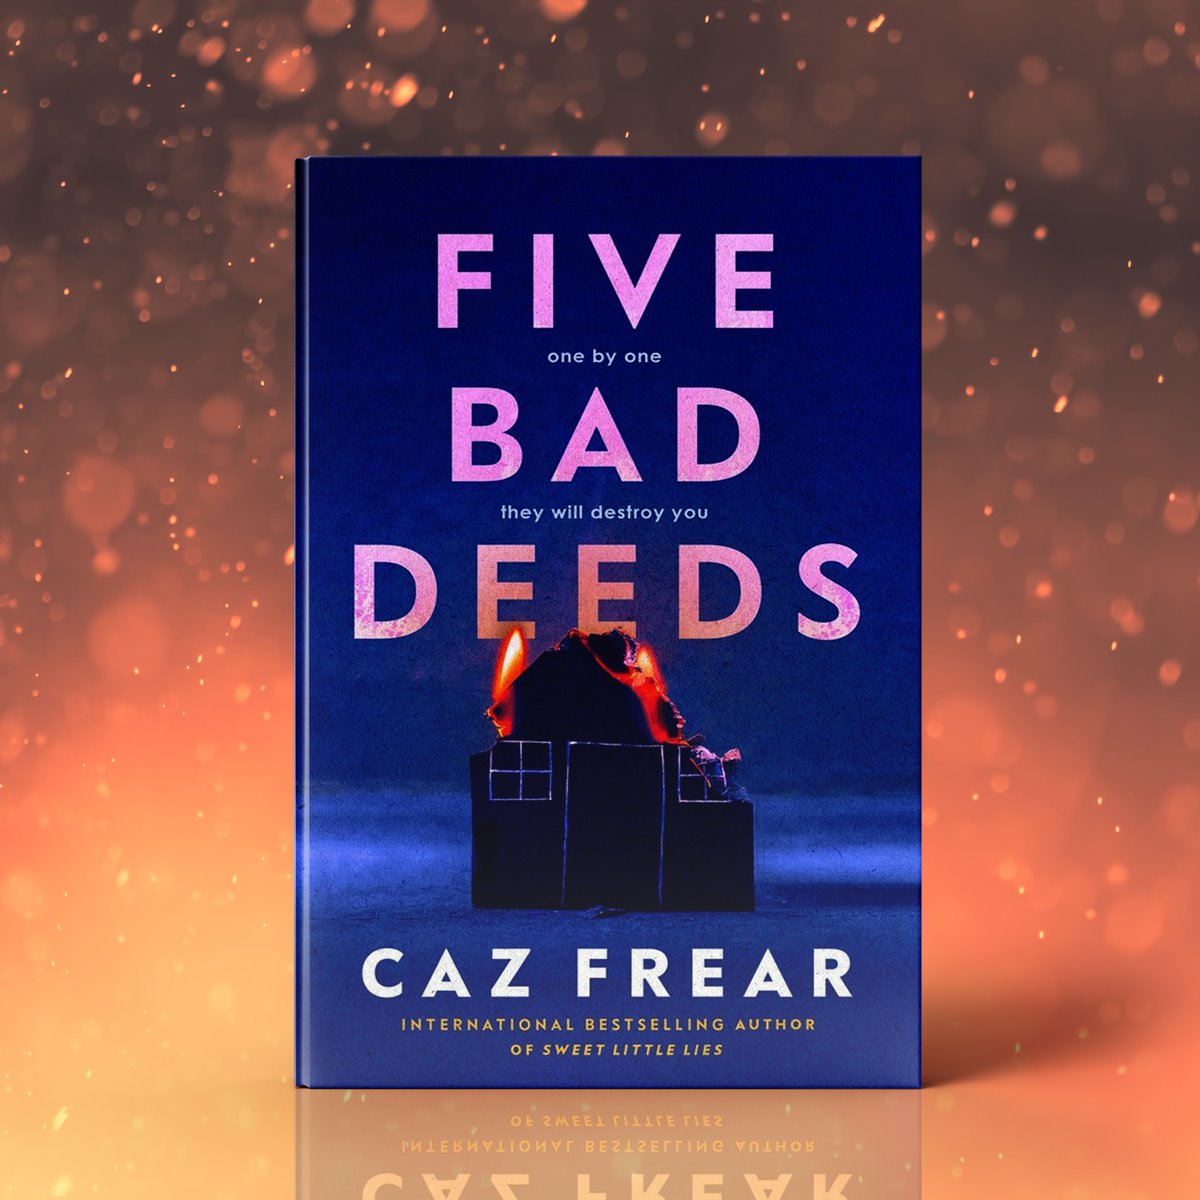 There's no smoke without fire. So when Ellen Walsh receives a string of threatening, anonymous messages, she knows exactly why she’s in the firing line. Could she lose everything she cherishes, just to keep a secret? #FiveBadDeeds, out now in hardback: amzn.to/3vHLoy9